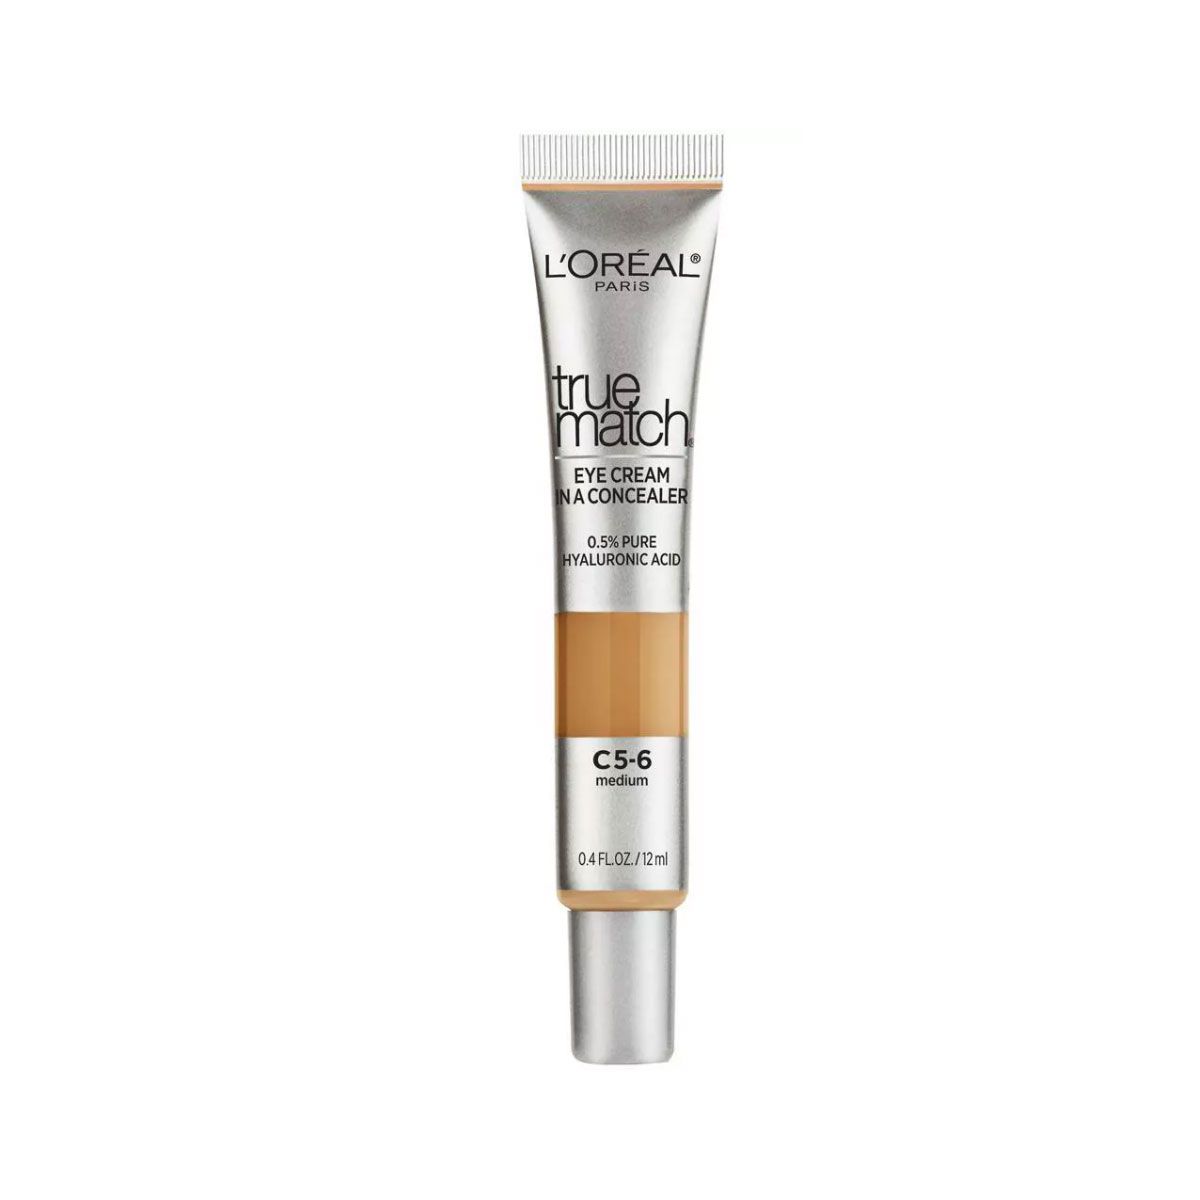 L’Oreal Paris True Match Eye Cream in a Concealer with Hyaluronic Acid